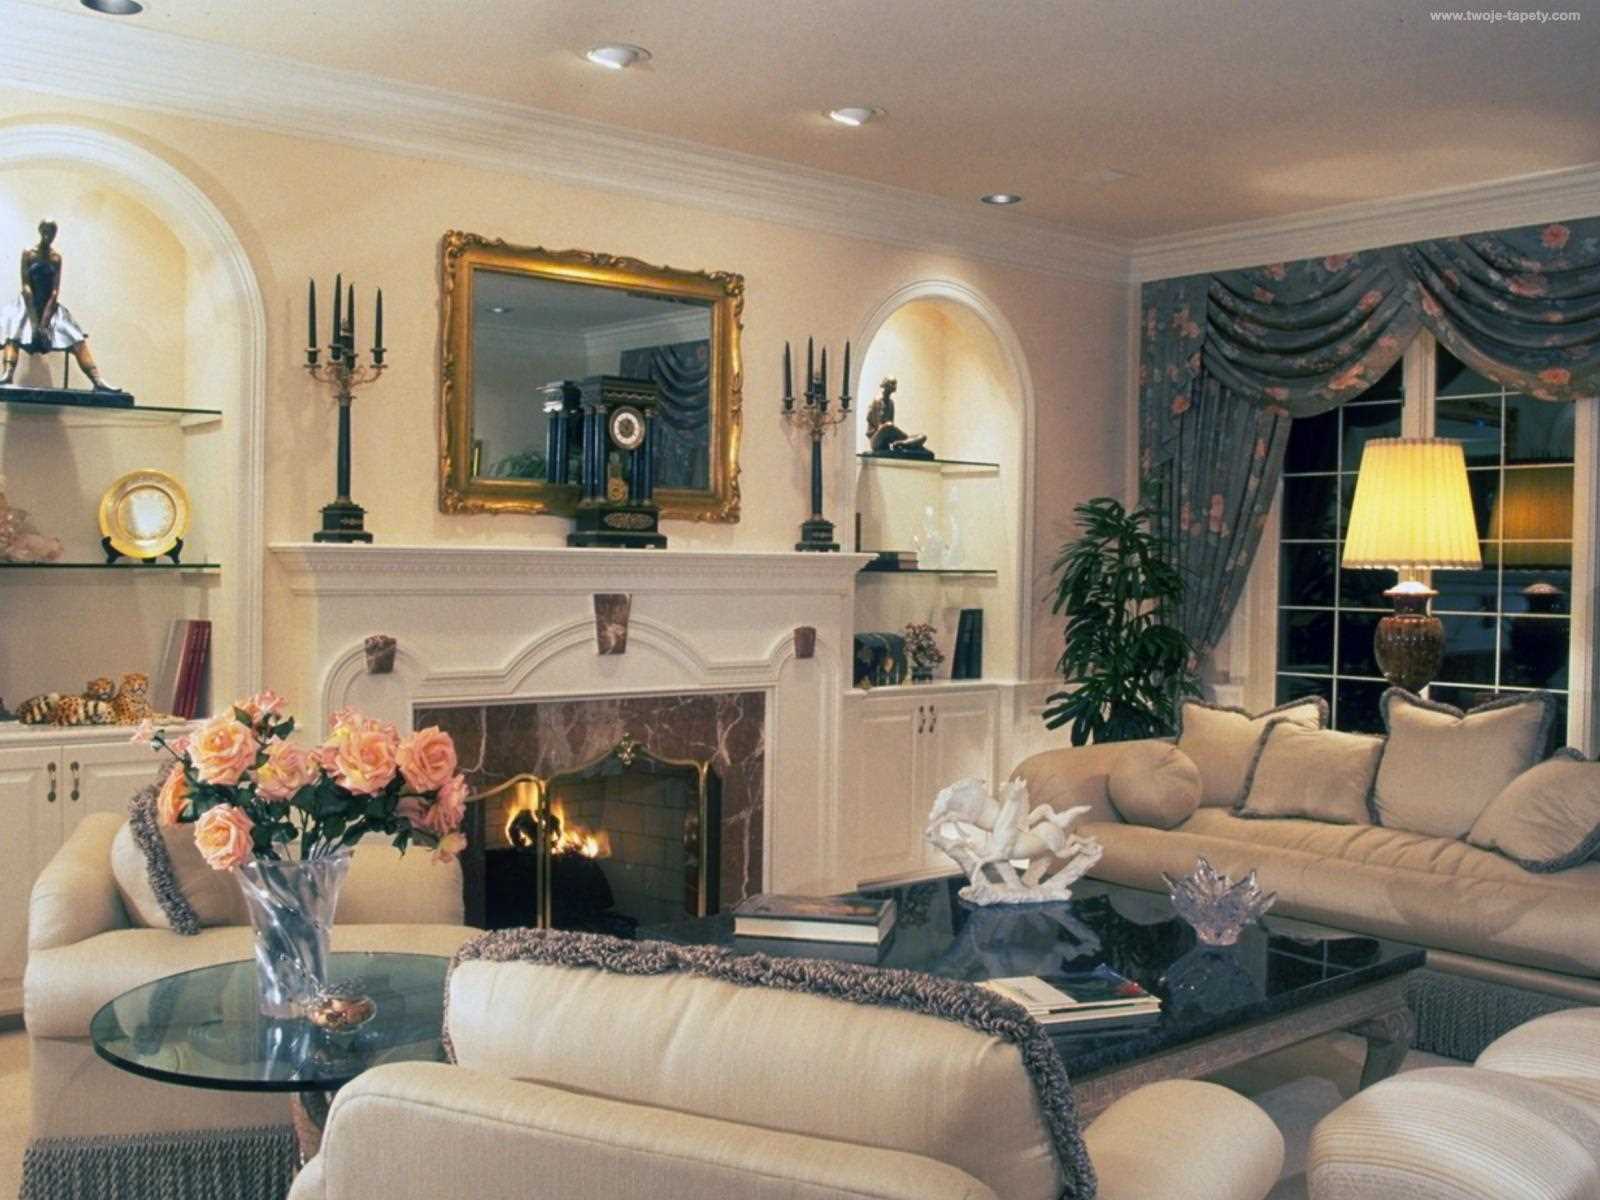 variant of the bright design of the living room with fireplace